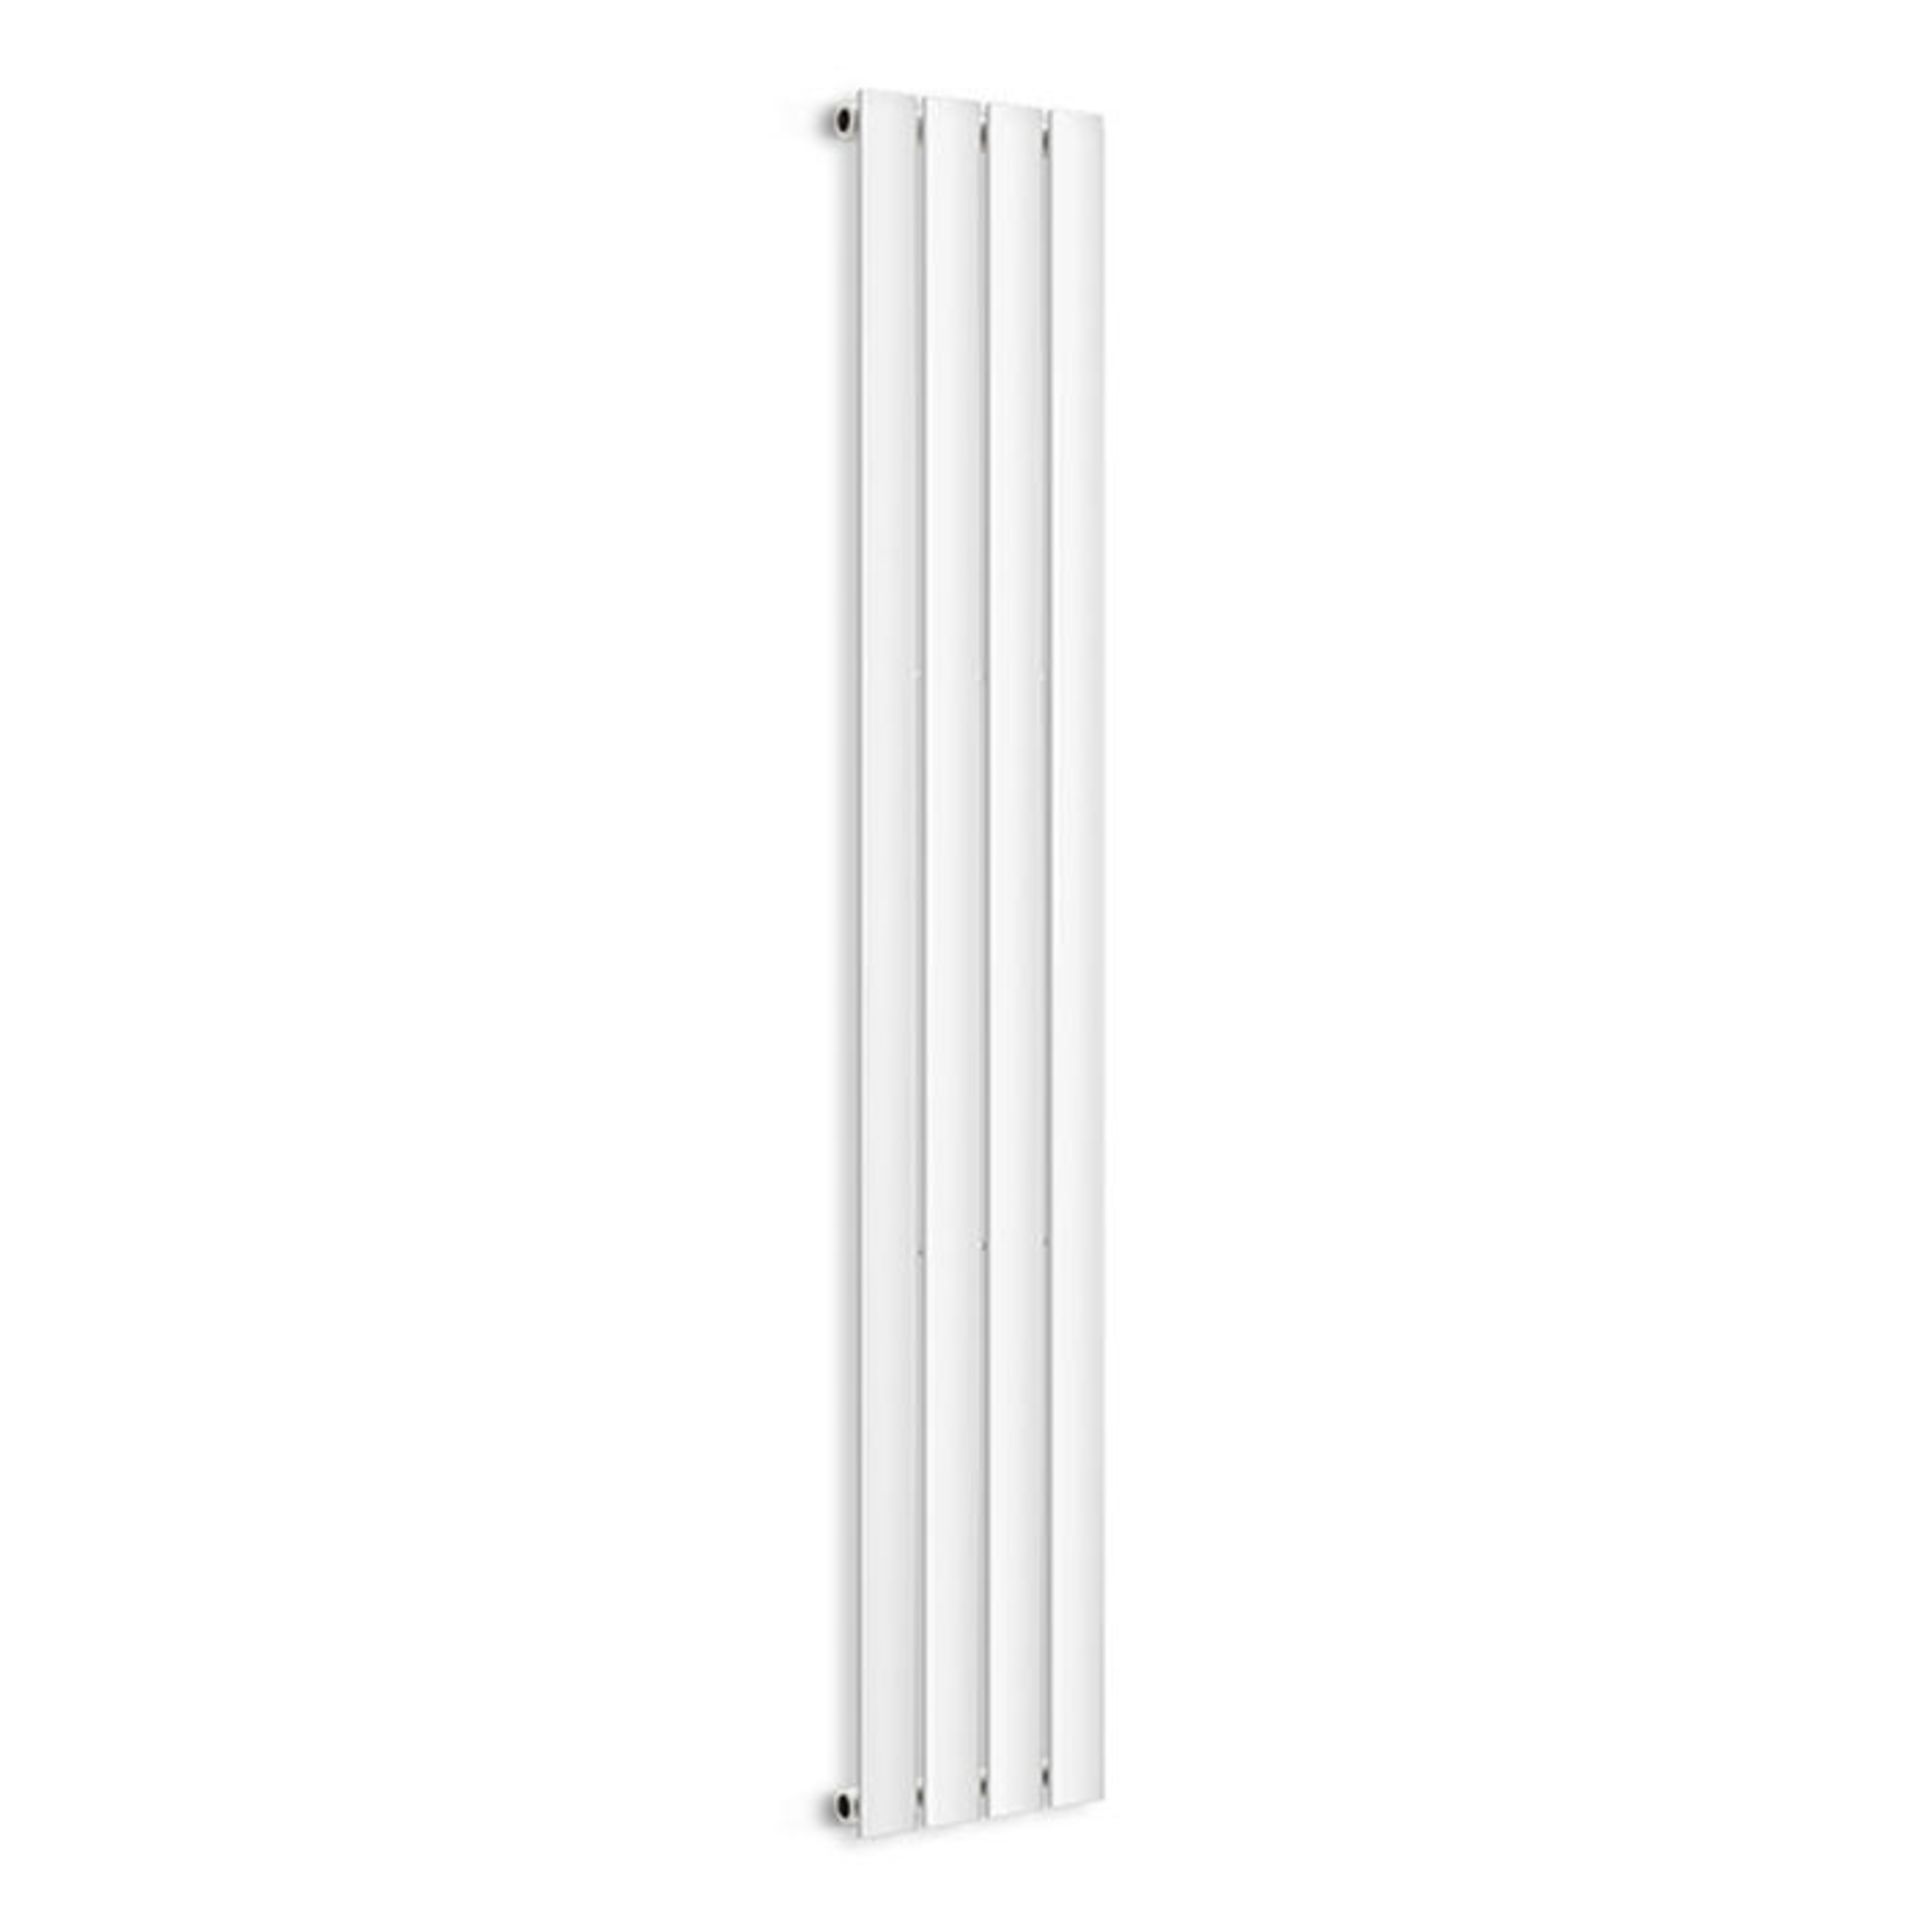 (QW124) 1800x300mm White Panel Vertical Radiator. RRP £219.00. Made from low carbon steel with aHigh